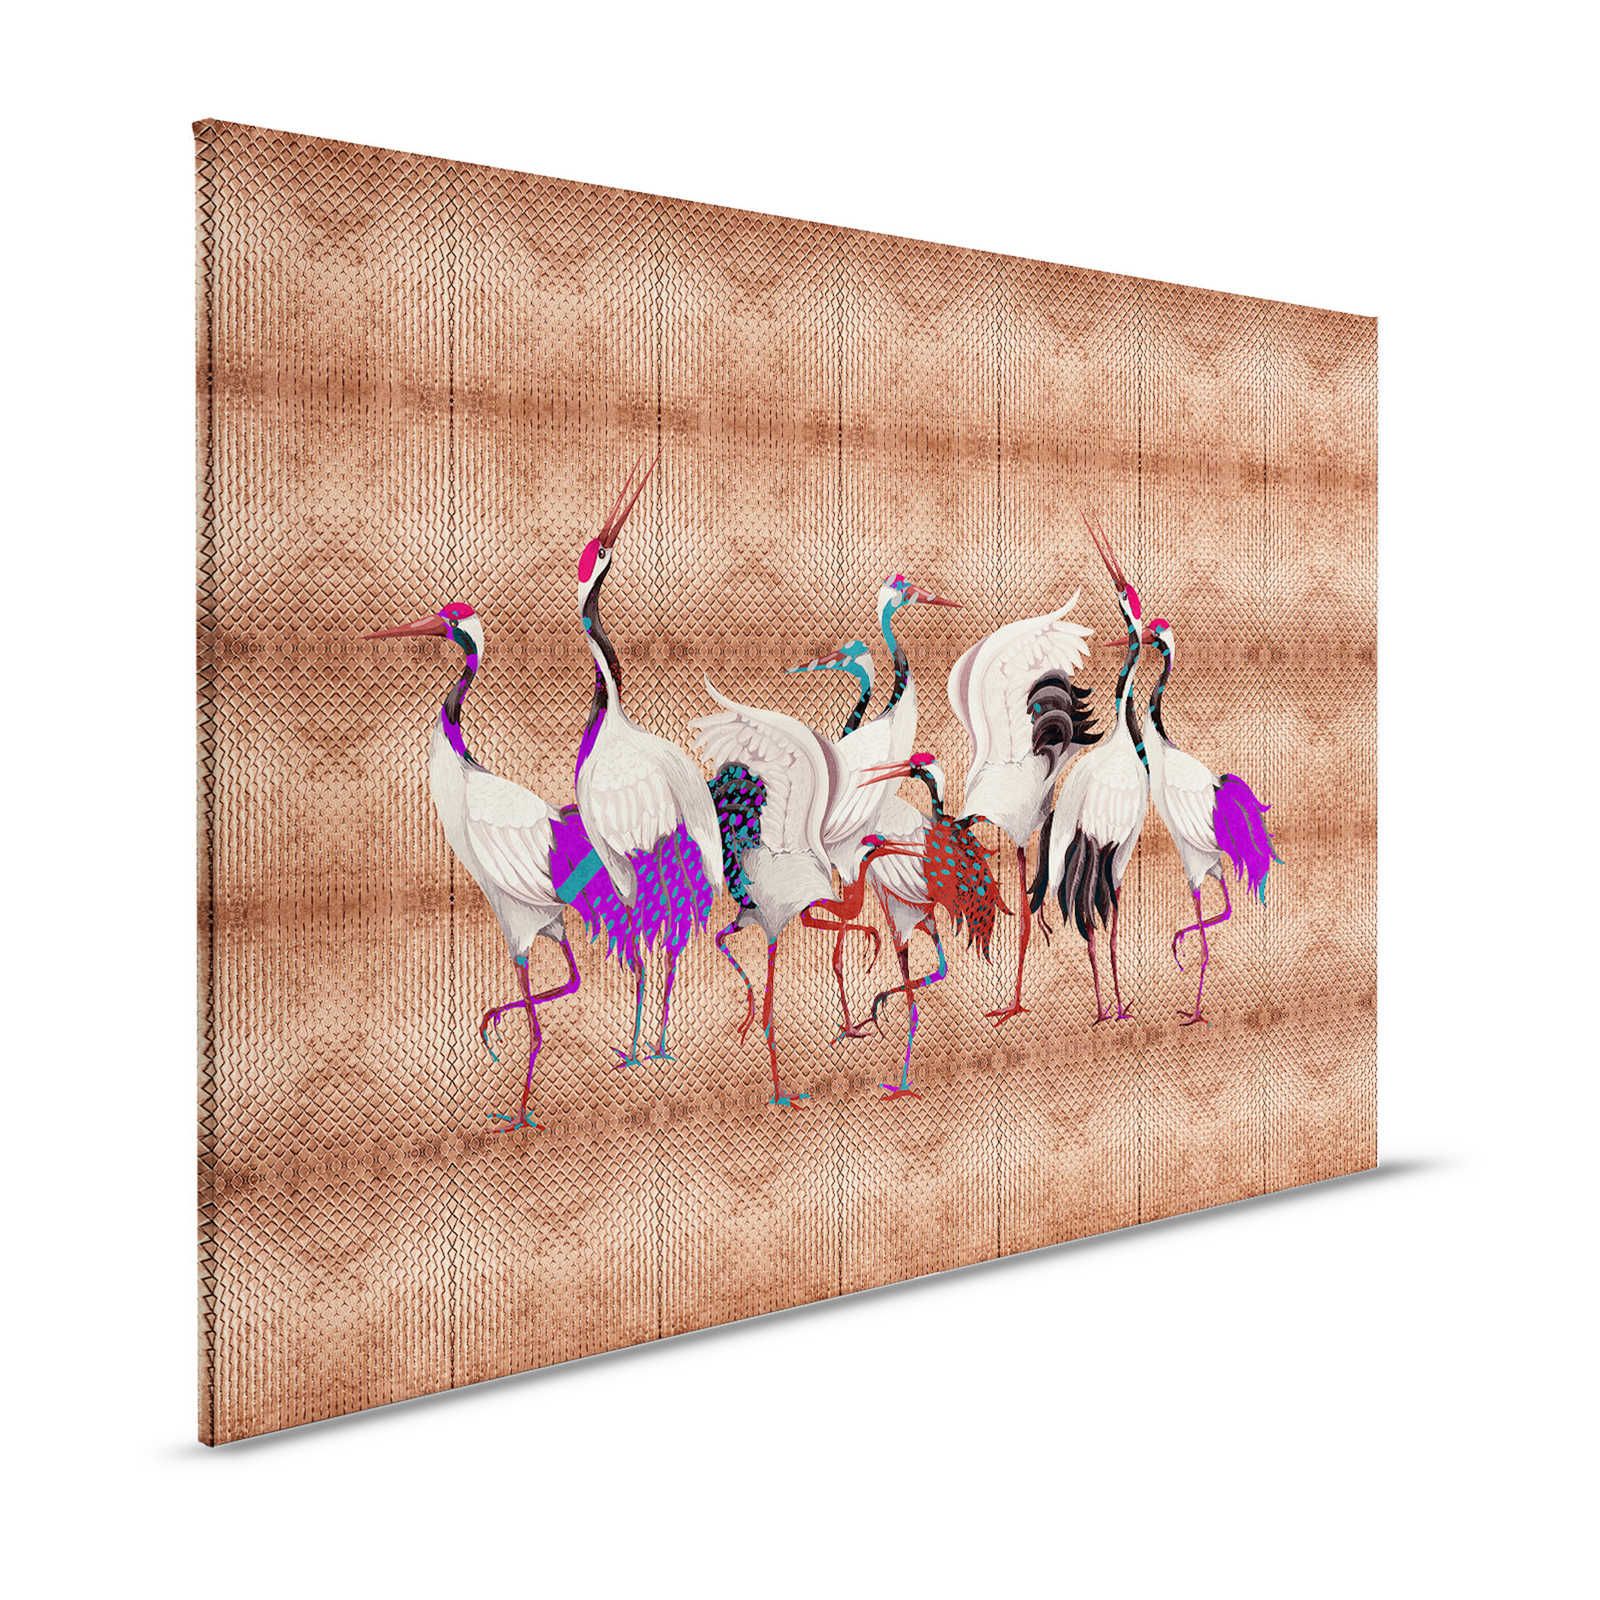 Land of Happiness 2 - Metallic canvas print copper with colourful crane motif - 1.20 m x 0.80 m
